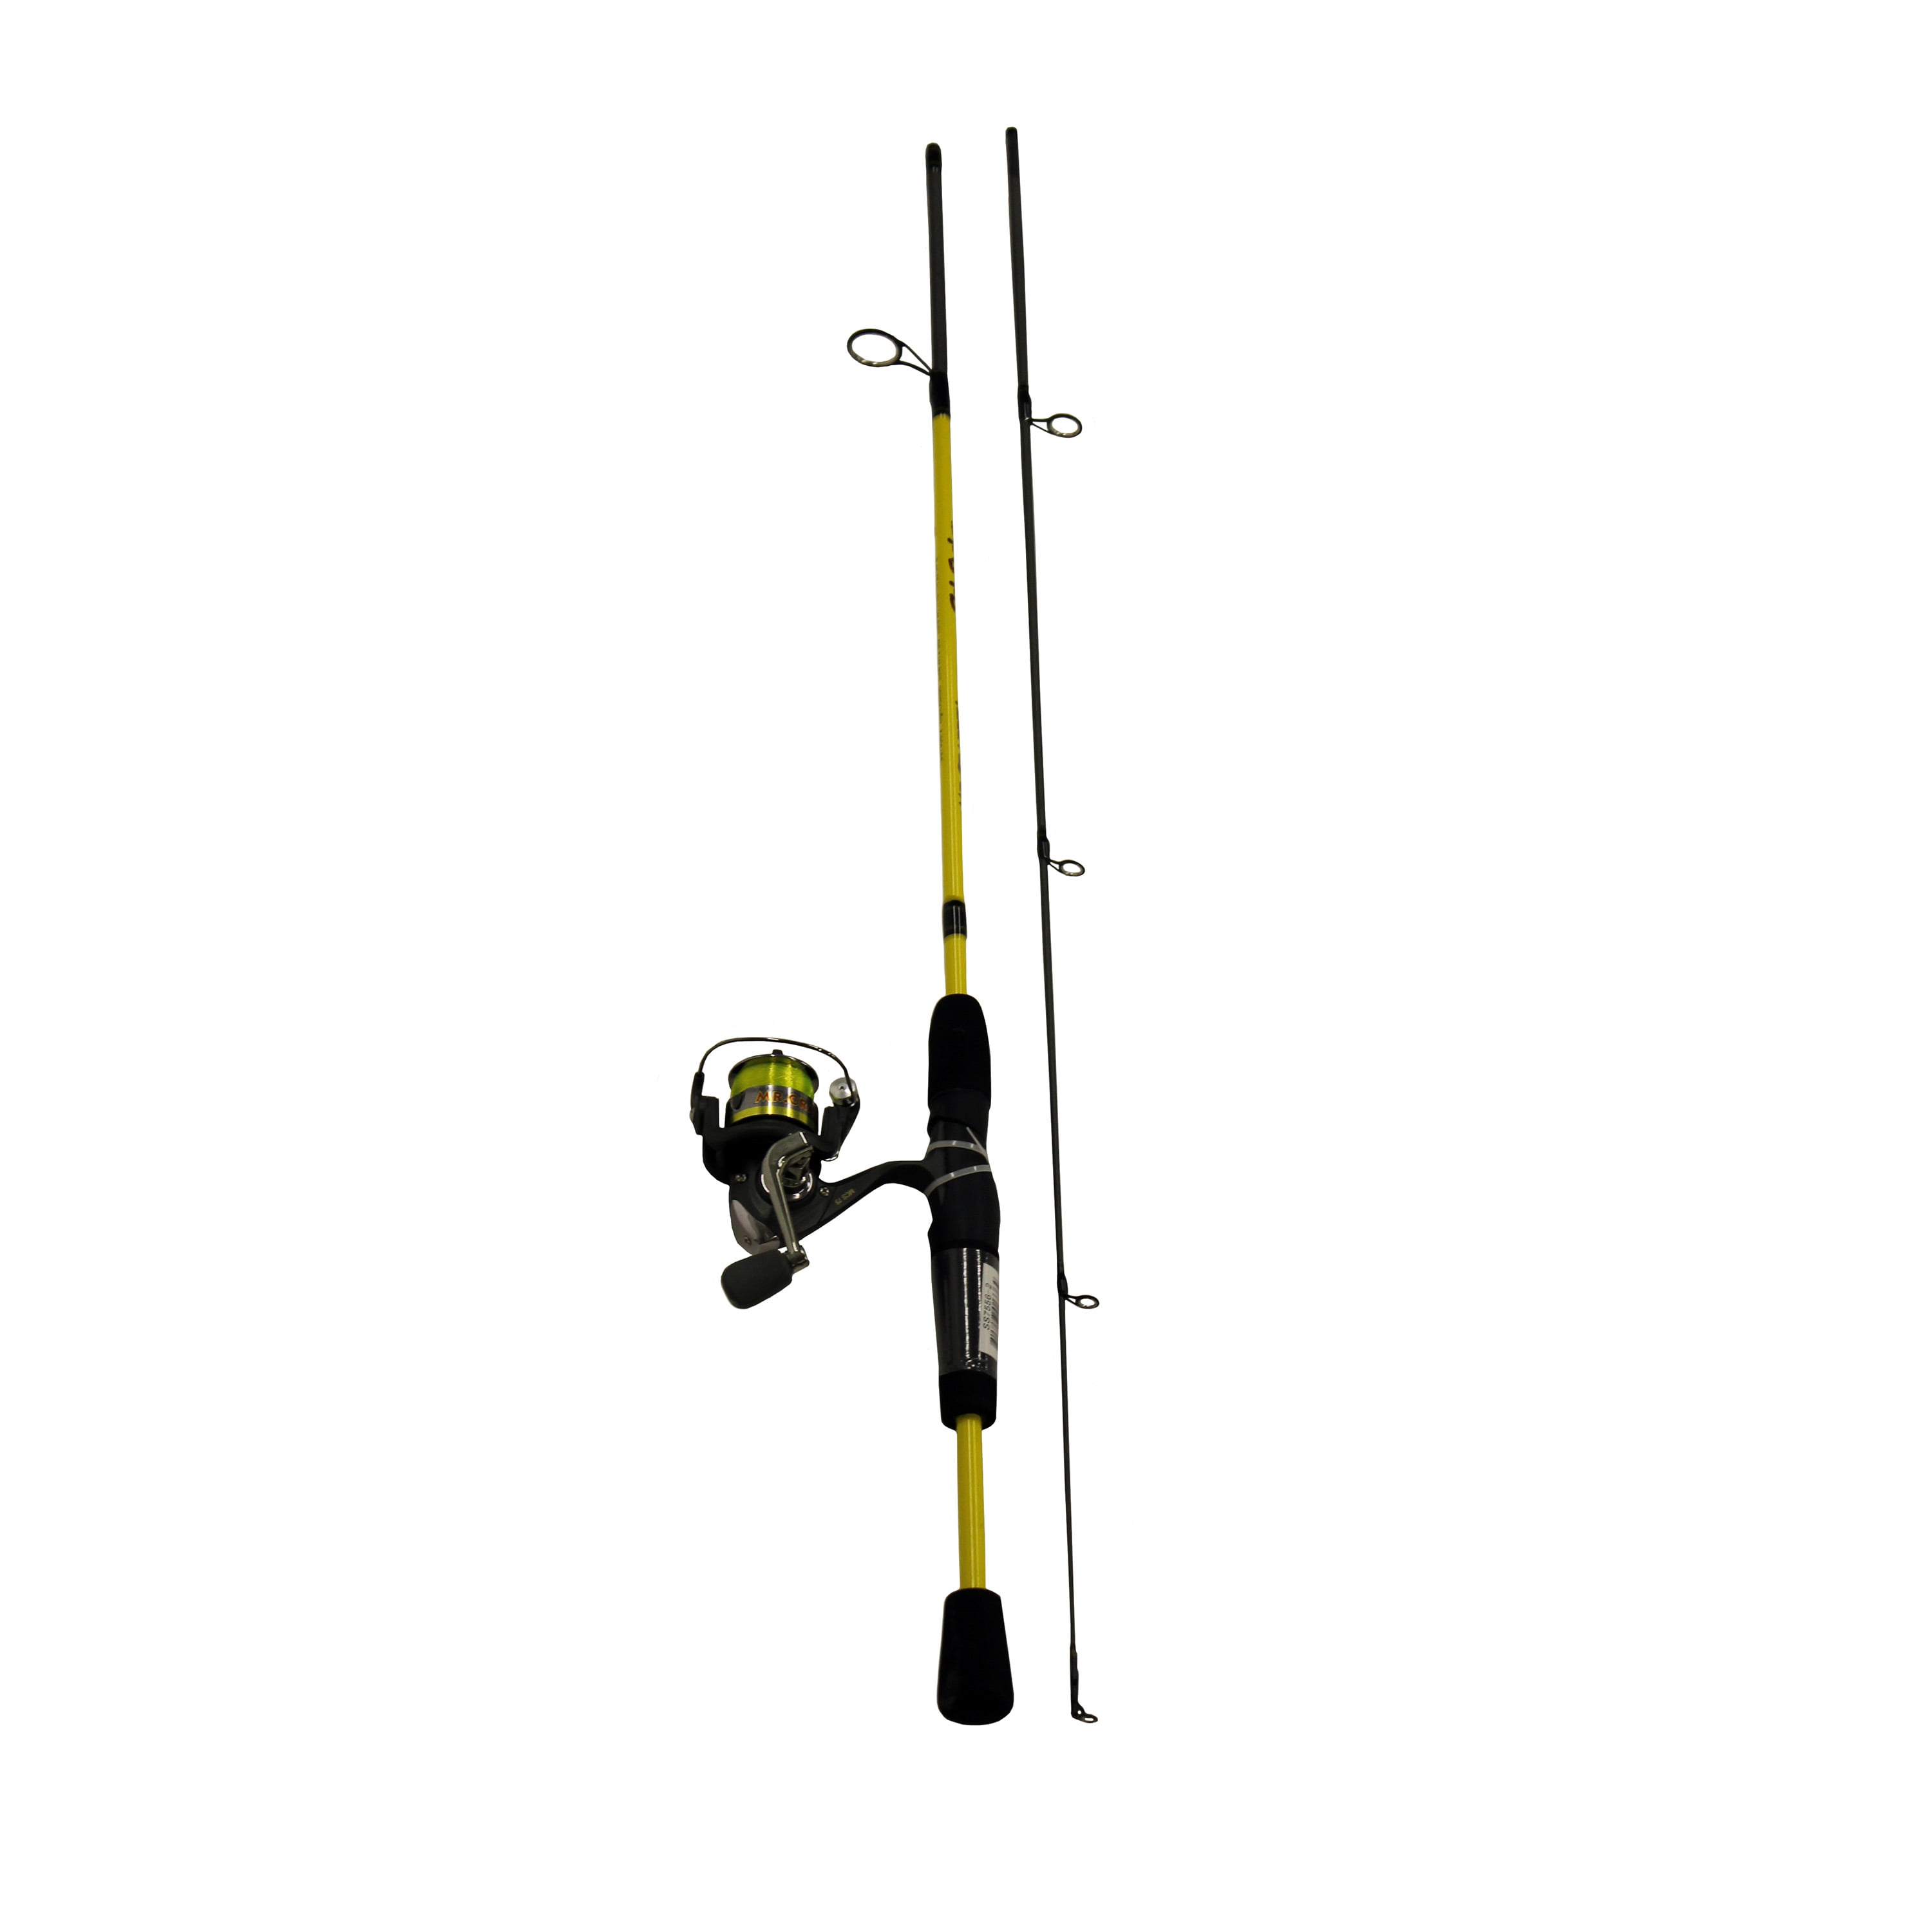 Mr. Crappie Slab Shaker Spinning Rod and Reel Fishing Combo 